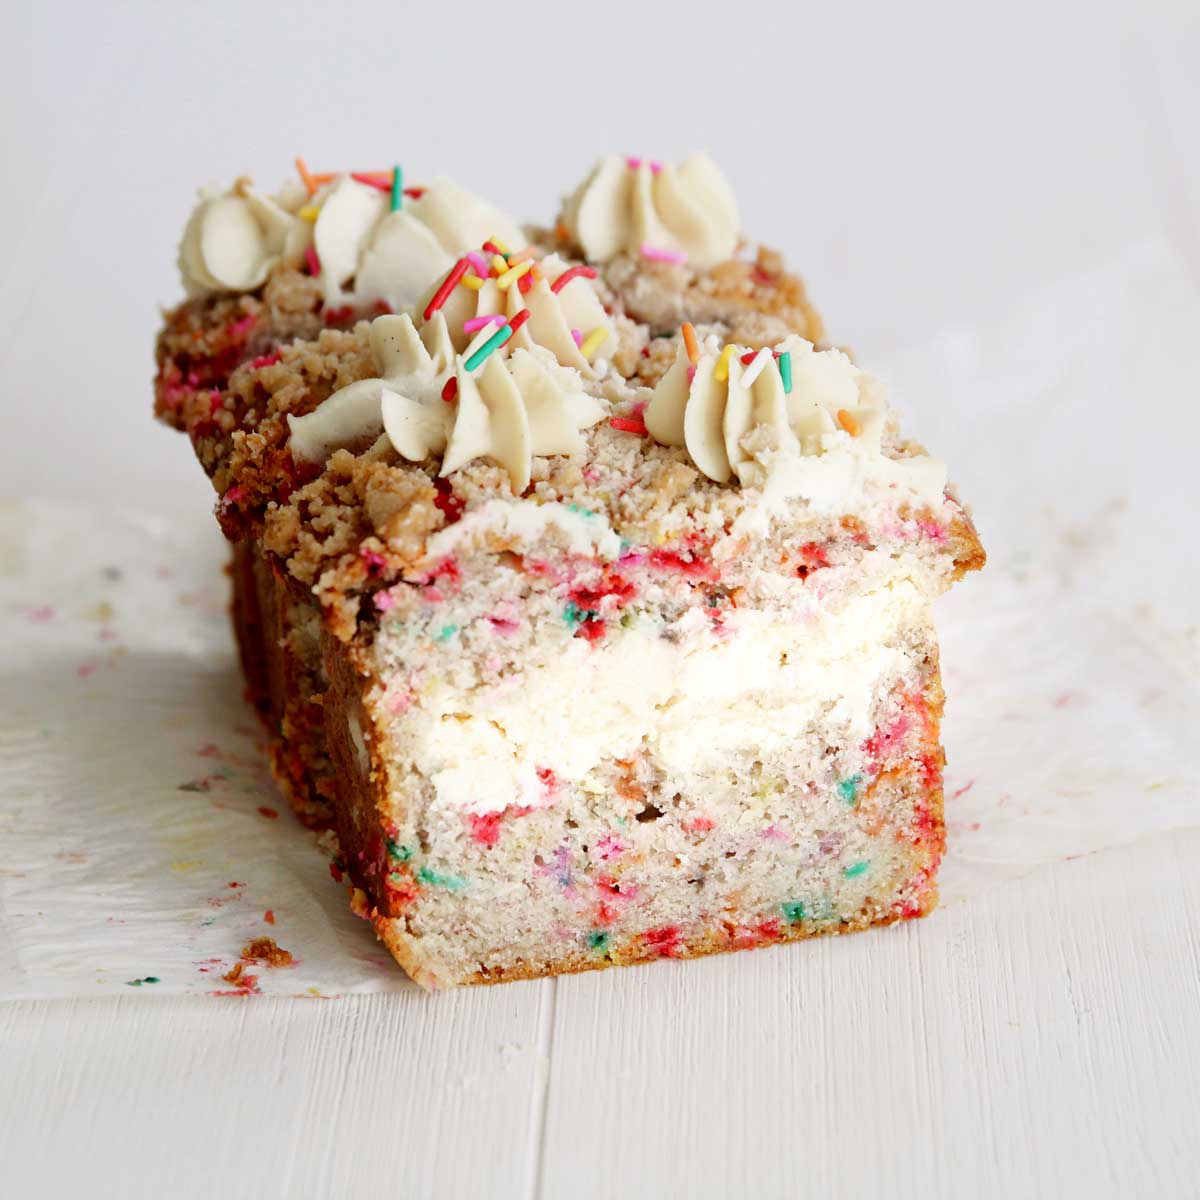 It's Your Birthday Cake Banana Bread with Cream Cheese Filling (No Eggs, No Butter) - Strawberry Whipped Cream